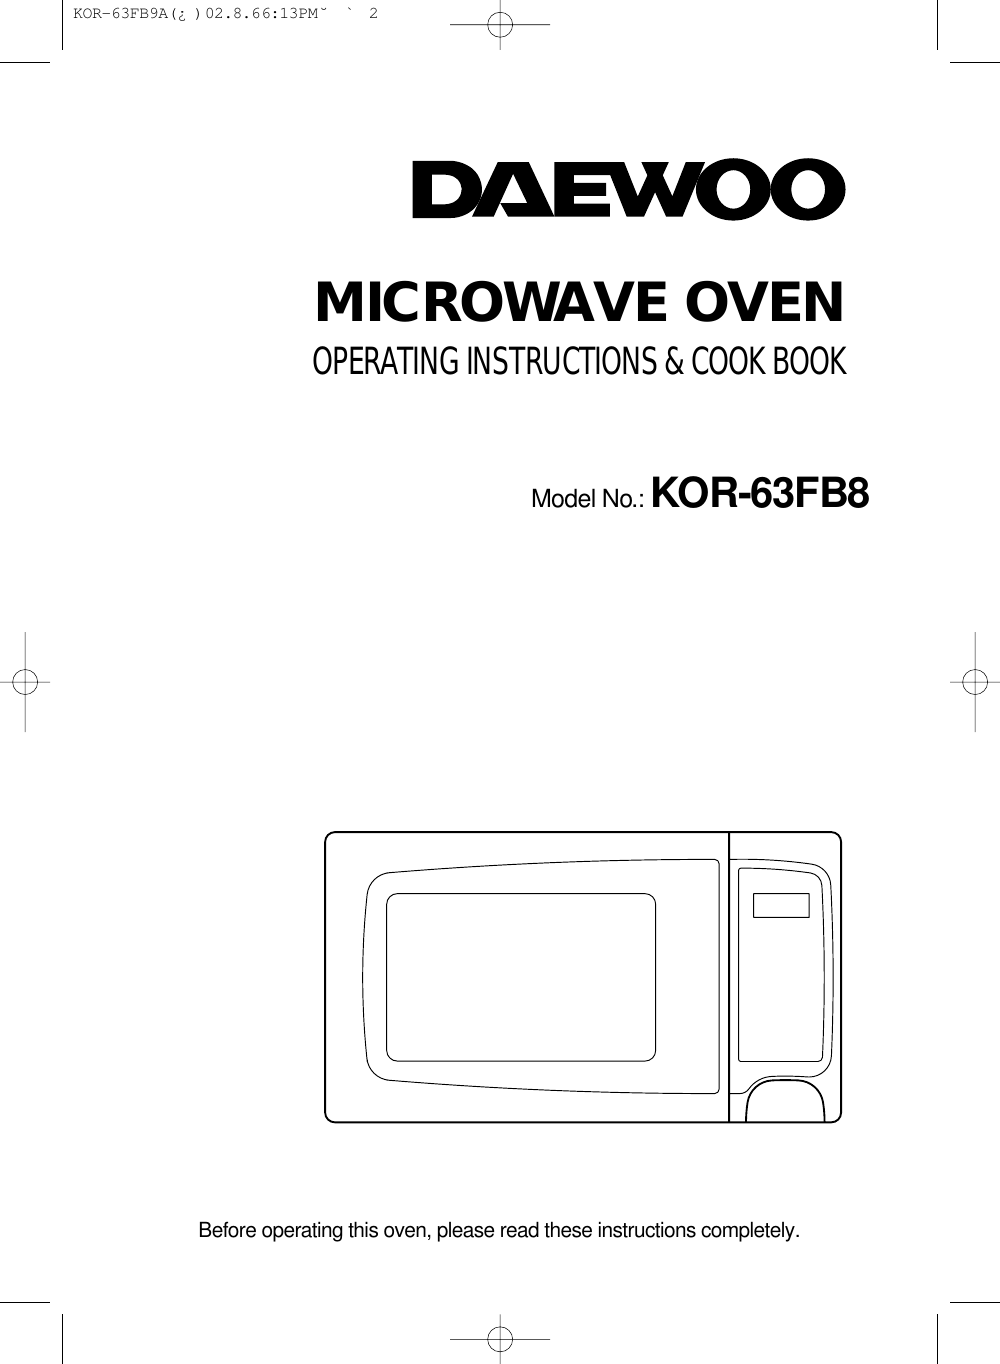 MICROWAVE OVENOPERATING INSTRUCTIONS &amp; COOK BOOKModel No.: KOR-63FB8Before operating this oven, please read these instructions completely. KOR-63FB9A(¿ )  02.8.6 6:13 PM  ˘`2